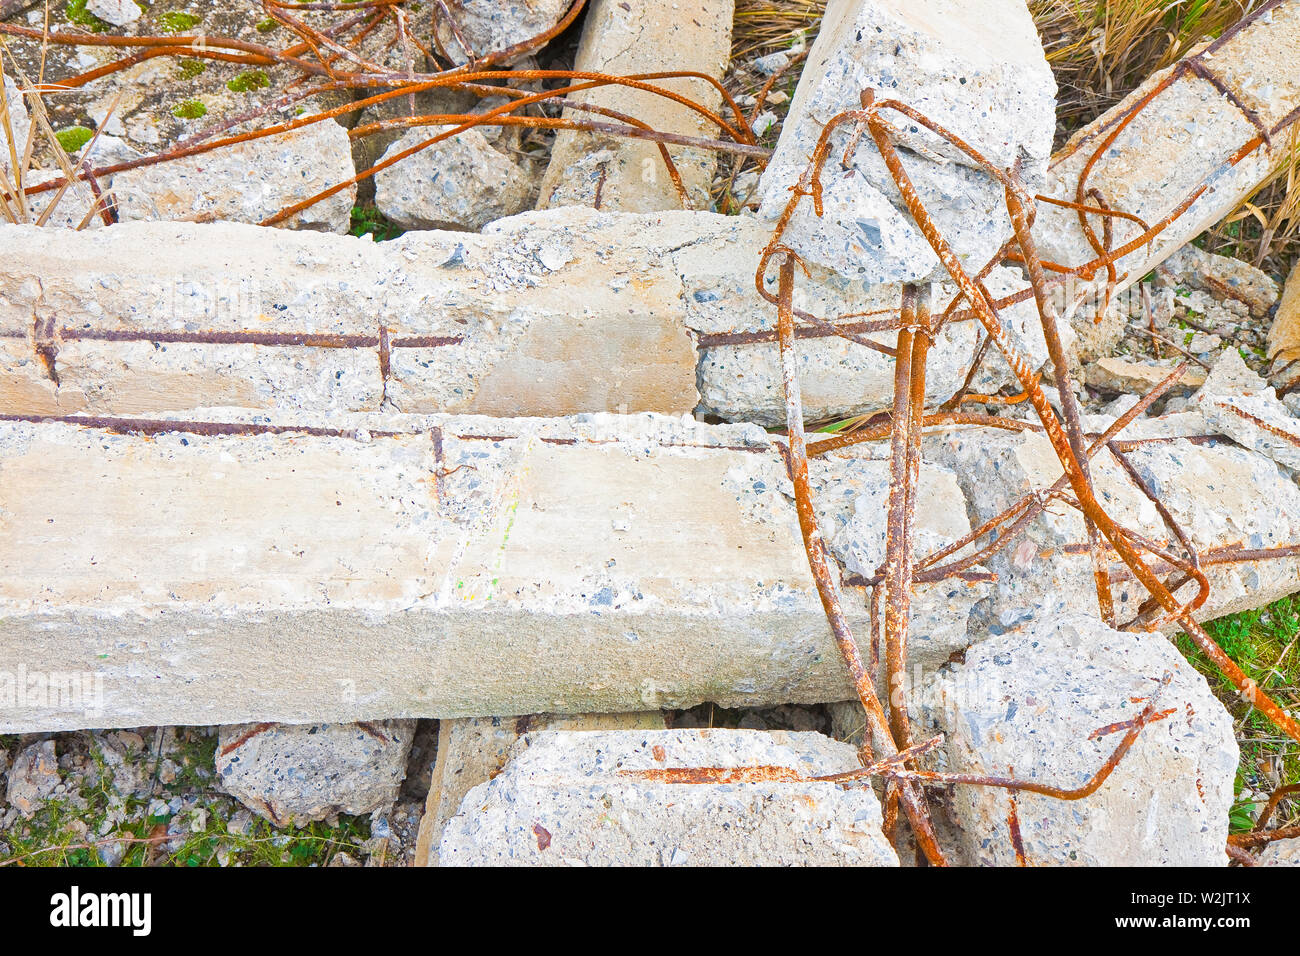 Collapsed reinforcement concrete structures with rusty steel bars in a construction site - concept image Stock Photo